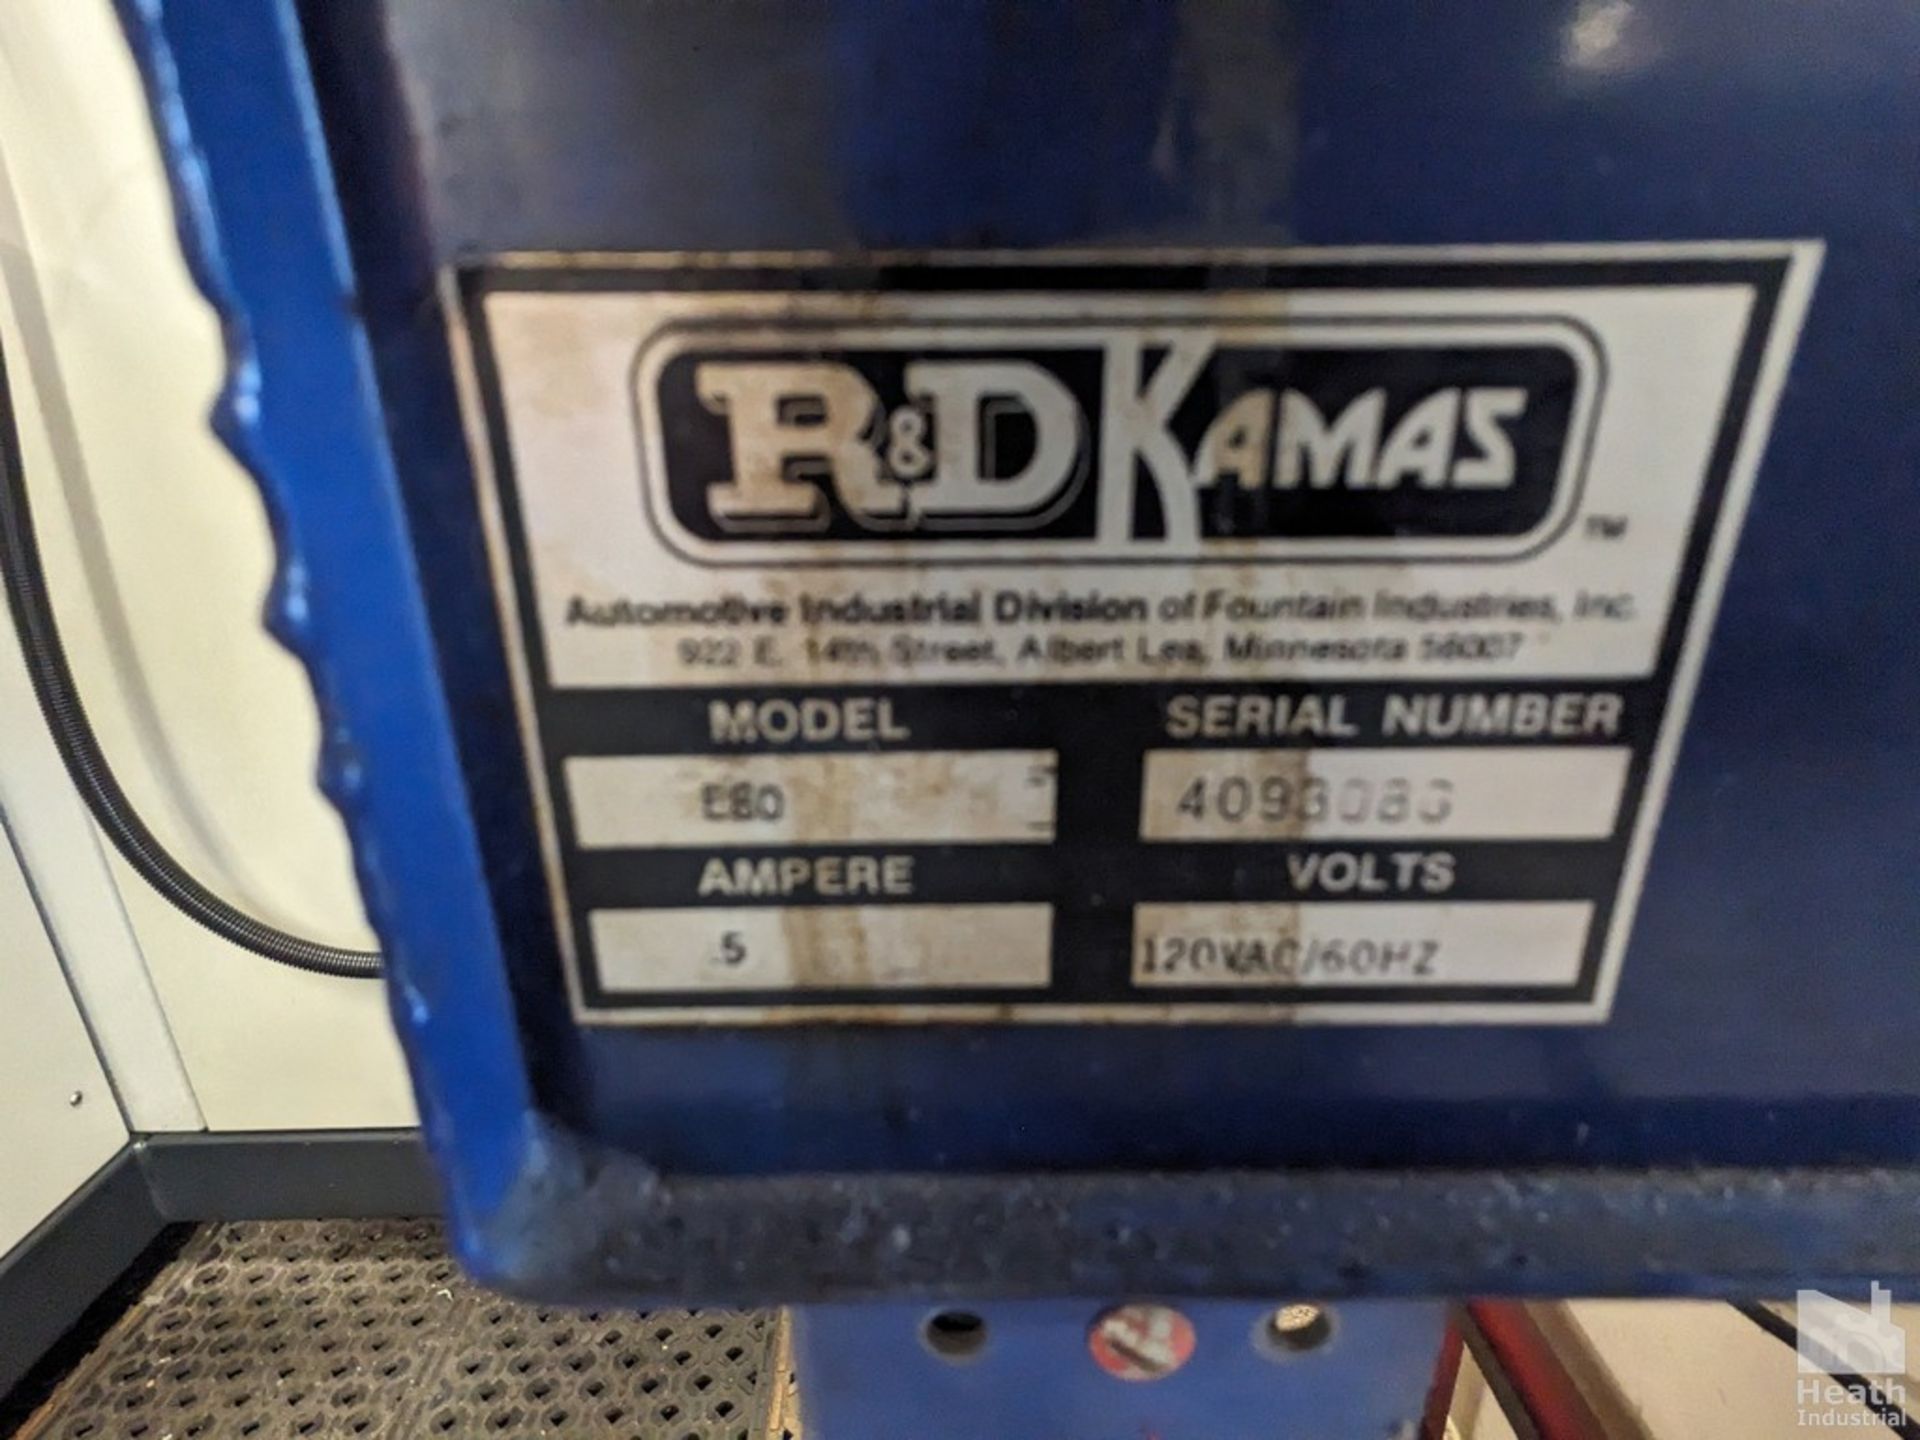 R & D KAMAS MODEL E80 PARTS CLEANER WITH RECIRCULATING PUMP - Image 3 of 3